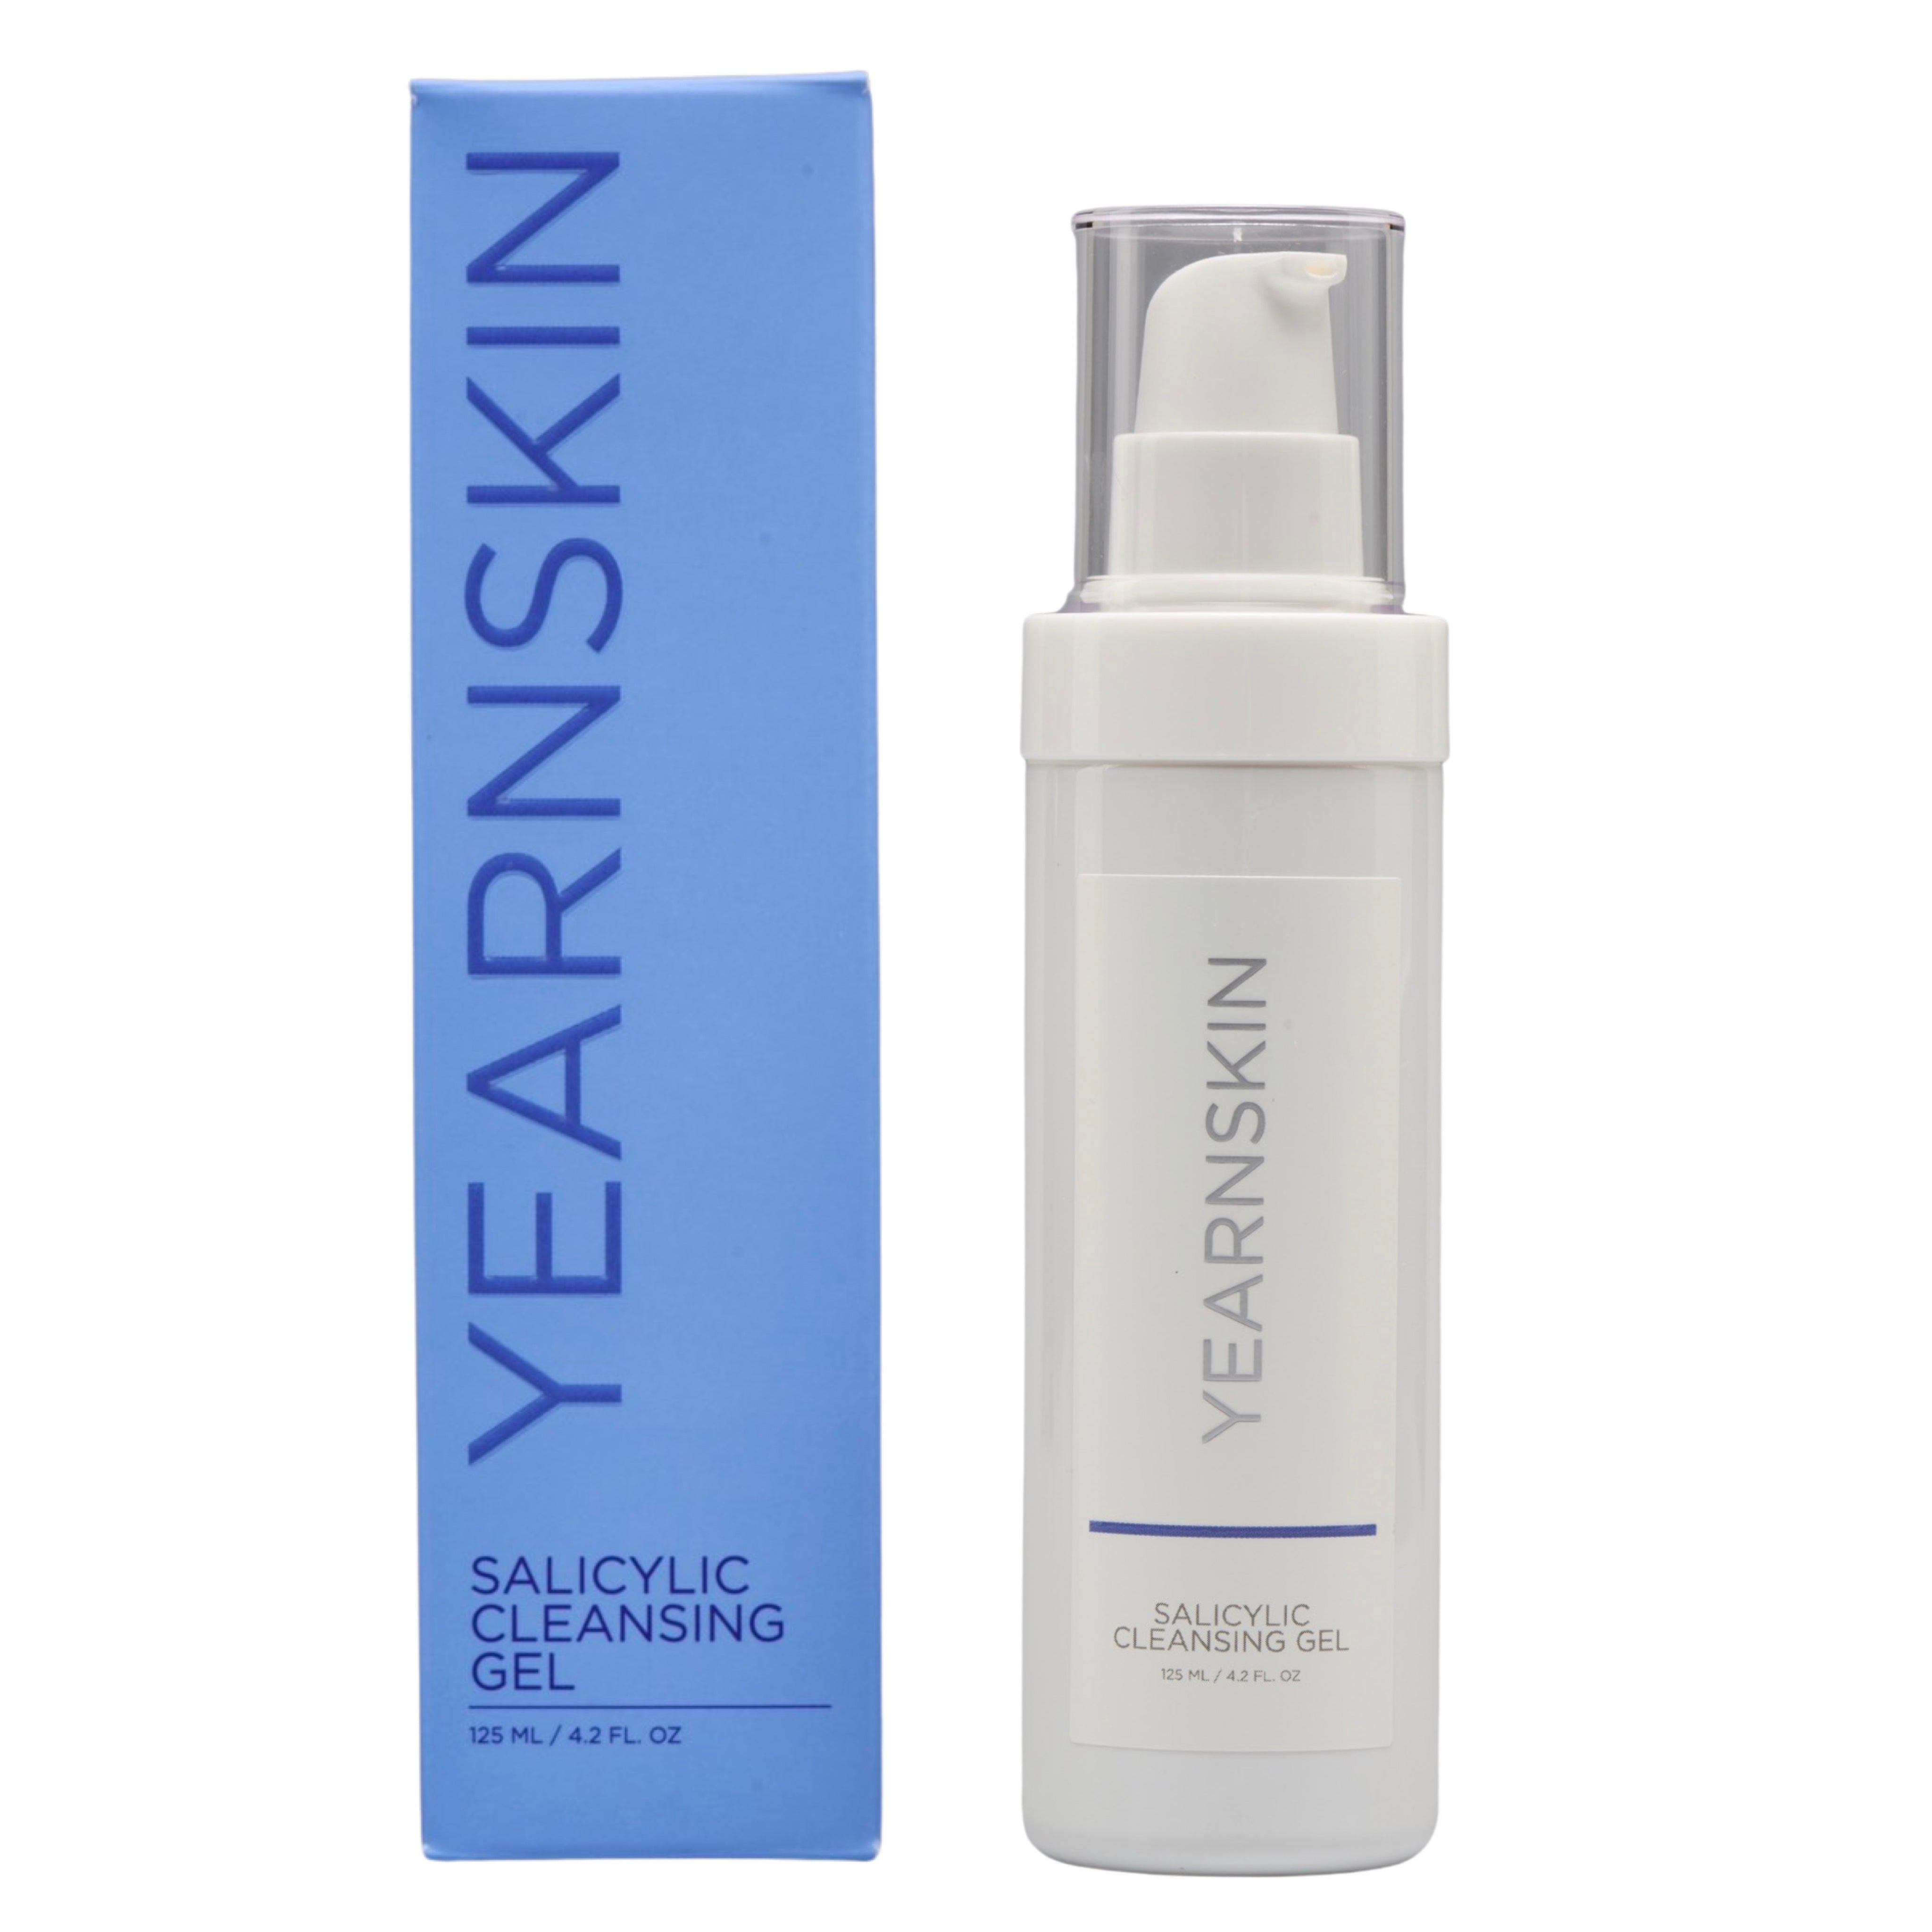 Salicylic Cleansing Gel product image - Shop Online | yearnskin.co.za